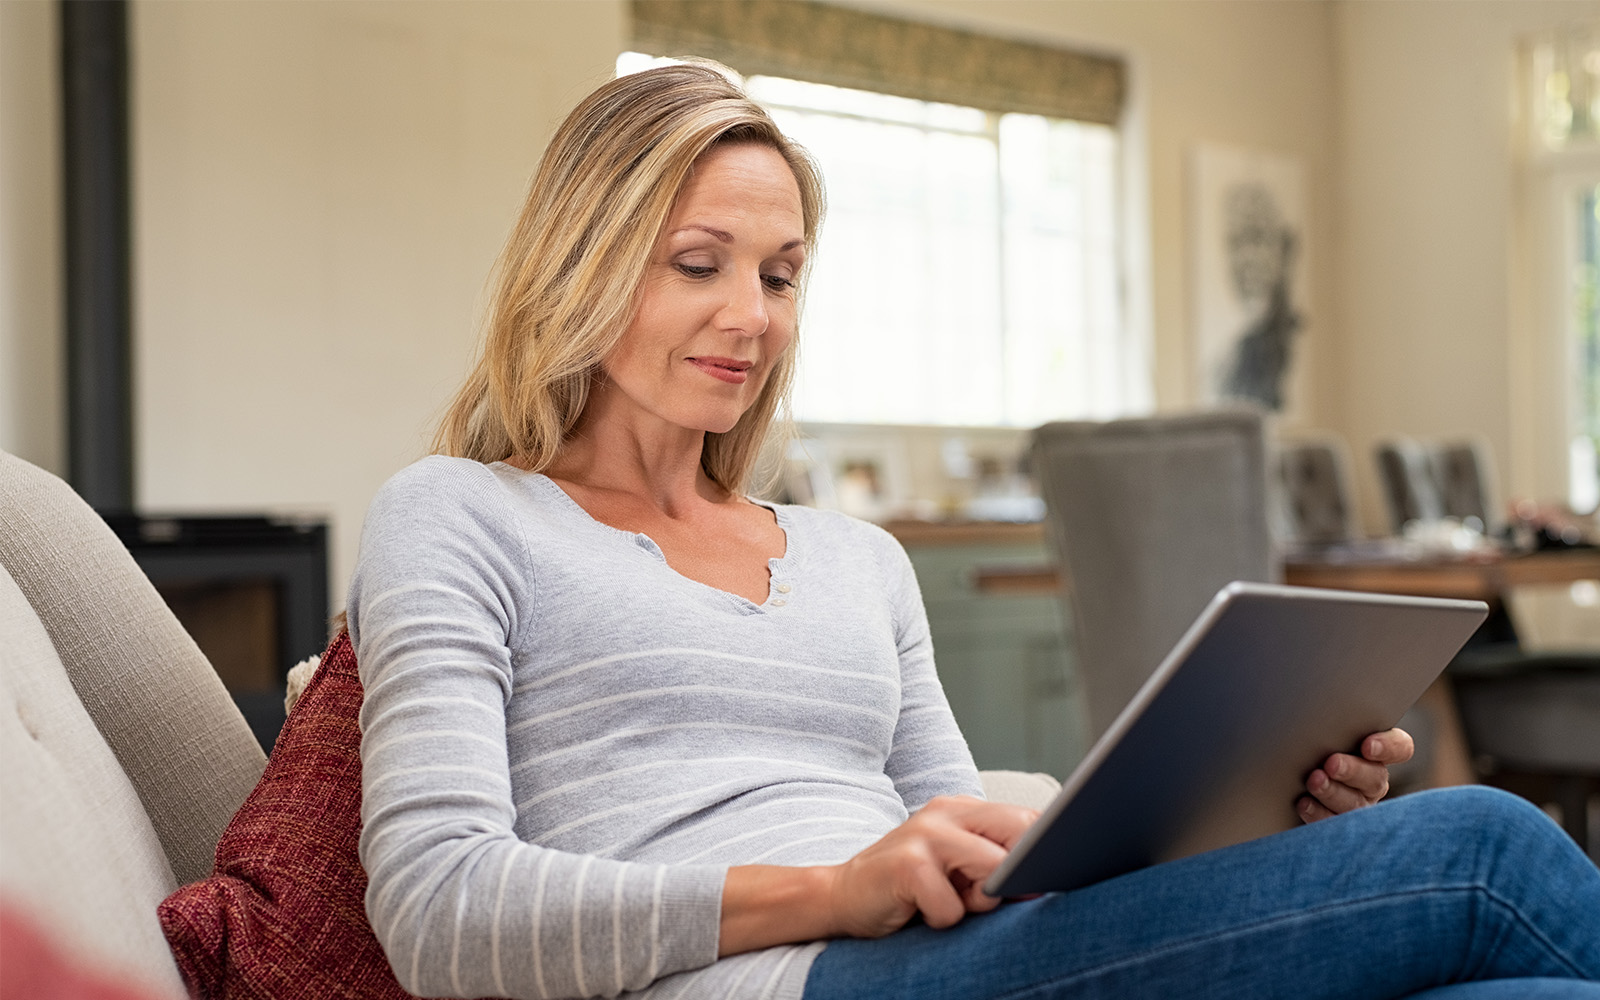 Woman sitting on couch and using digital tablet